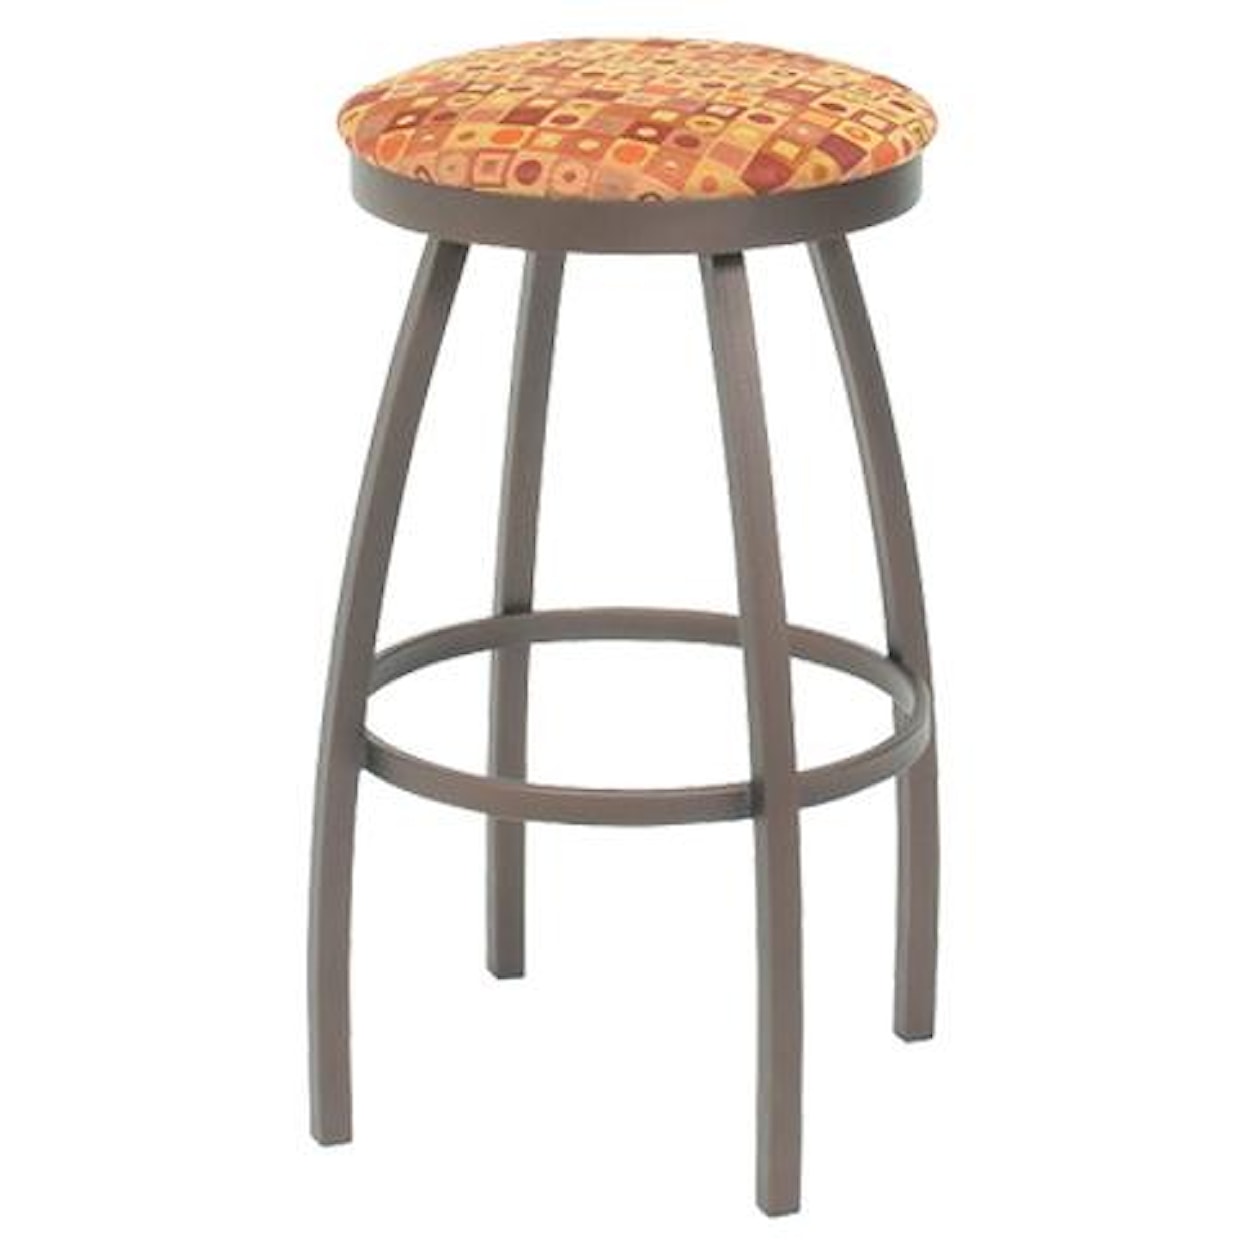 Trica Contemporary Seating Henry Bar Stool